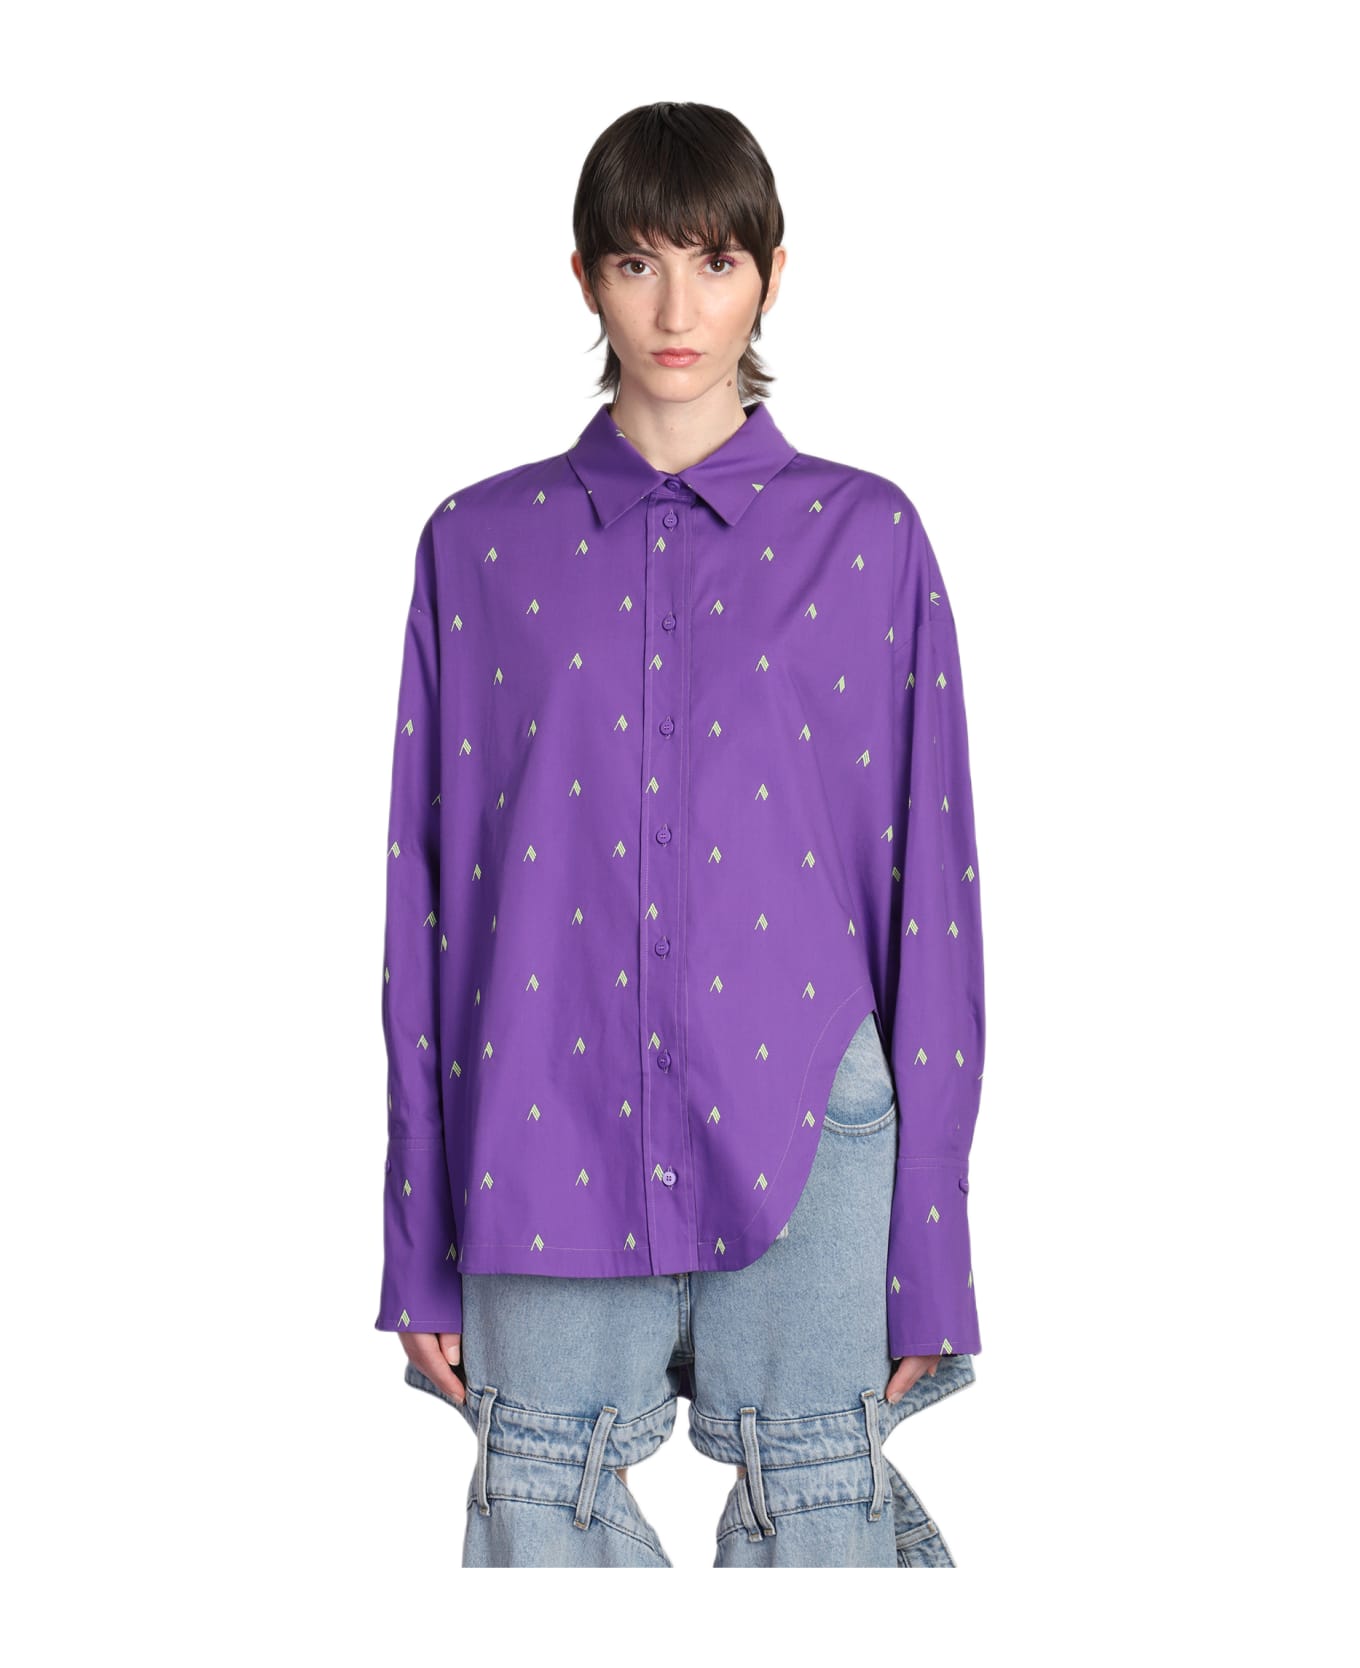 The Attico All-over Patterned Button-up Shirt - PURPLELIGHTGREEN